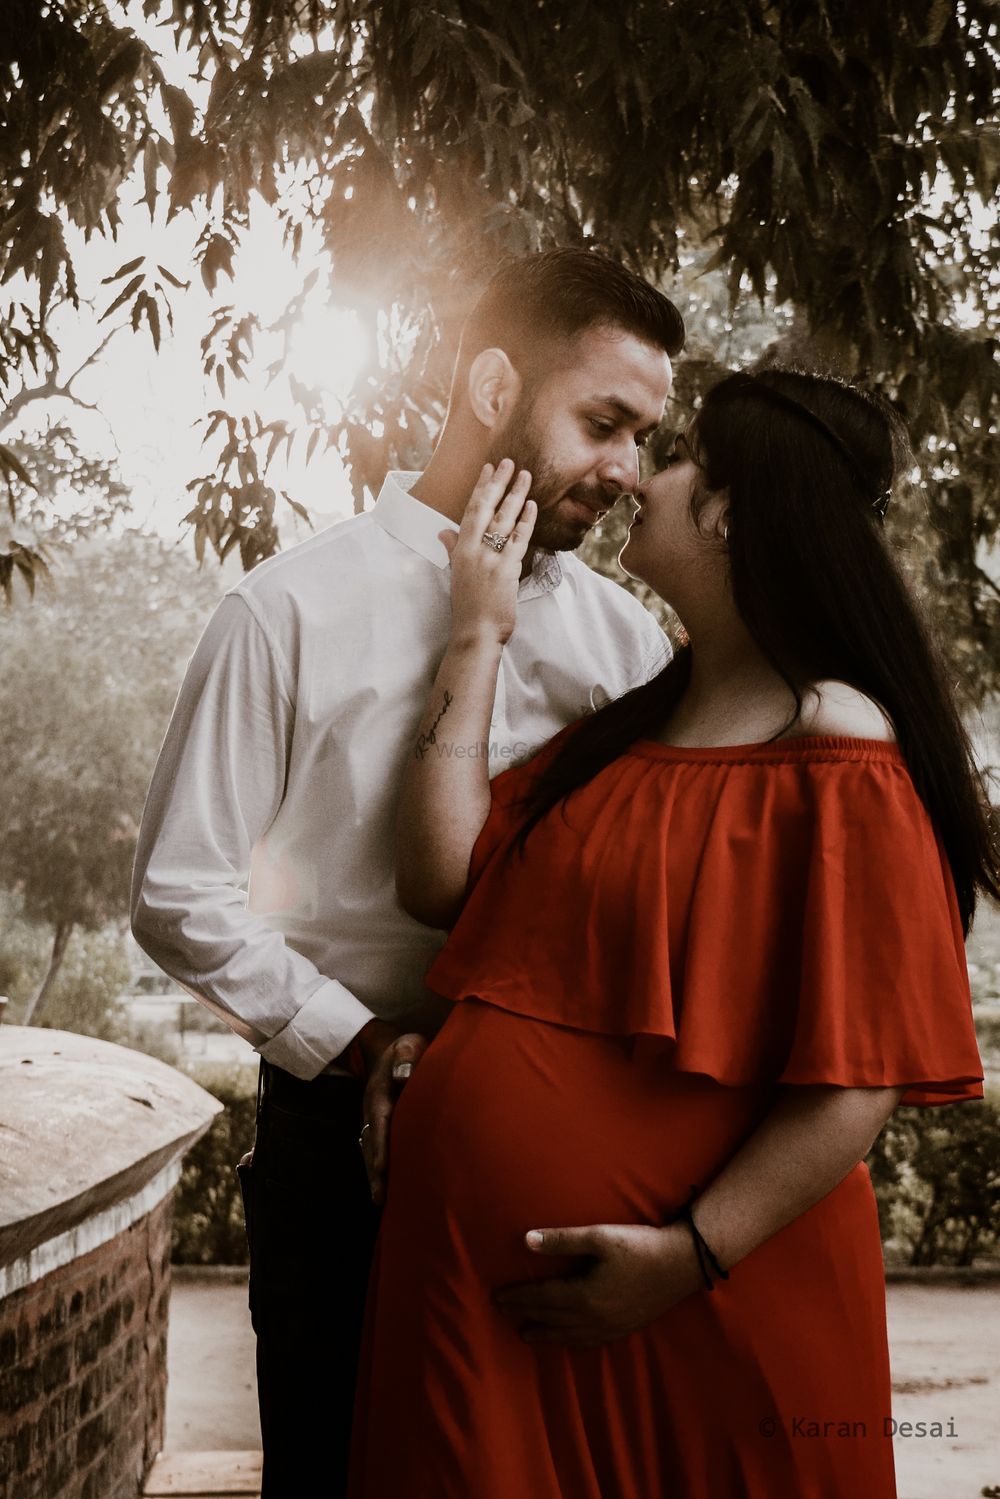 Photo From Maternity Photoshoot - By Clicksproductions Photography